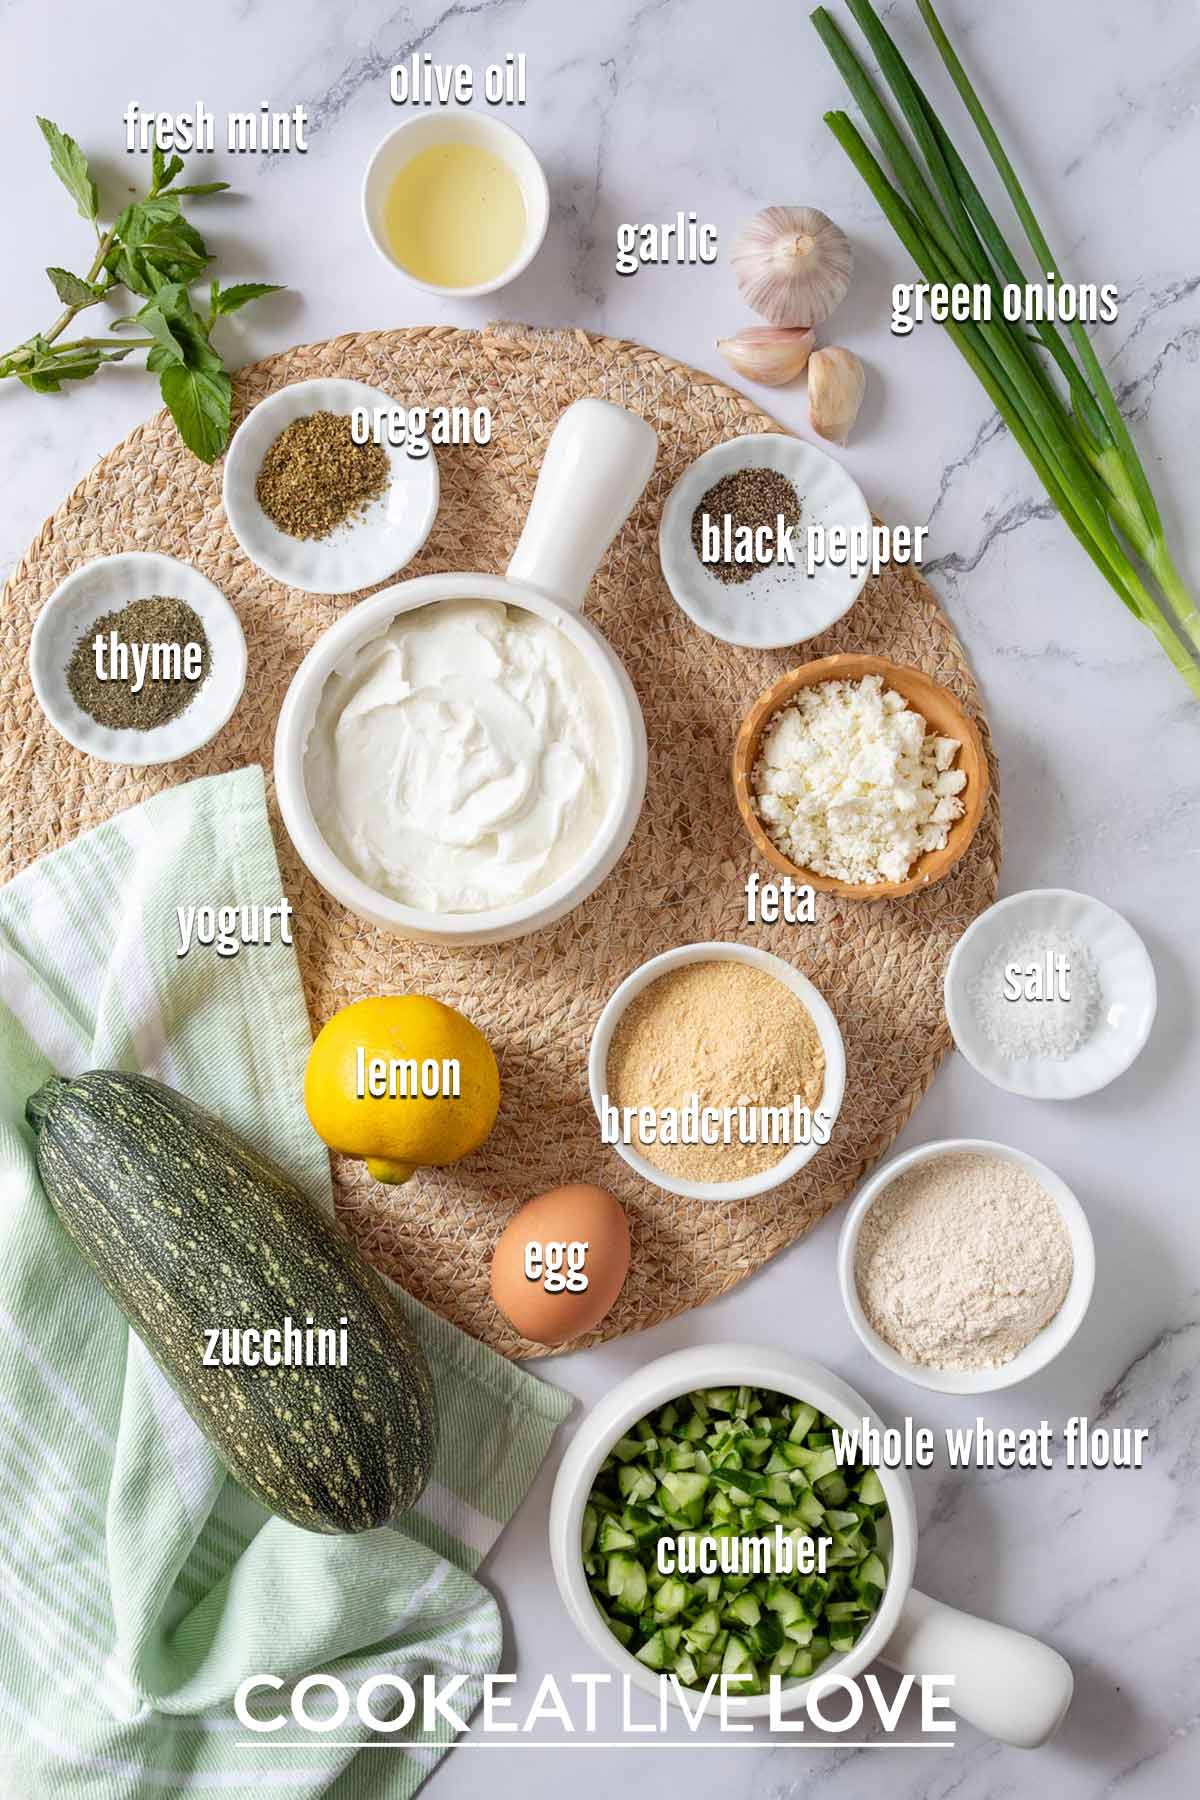 Ingredients to make baked zucchini patties on the table with text labels.